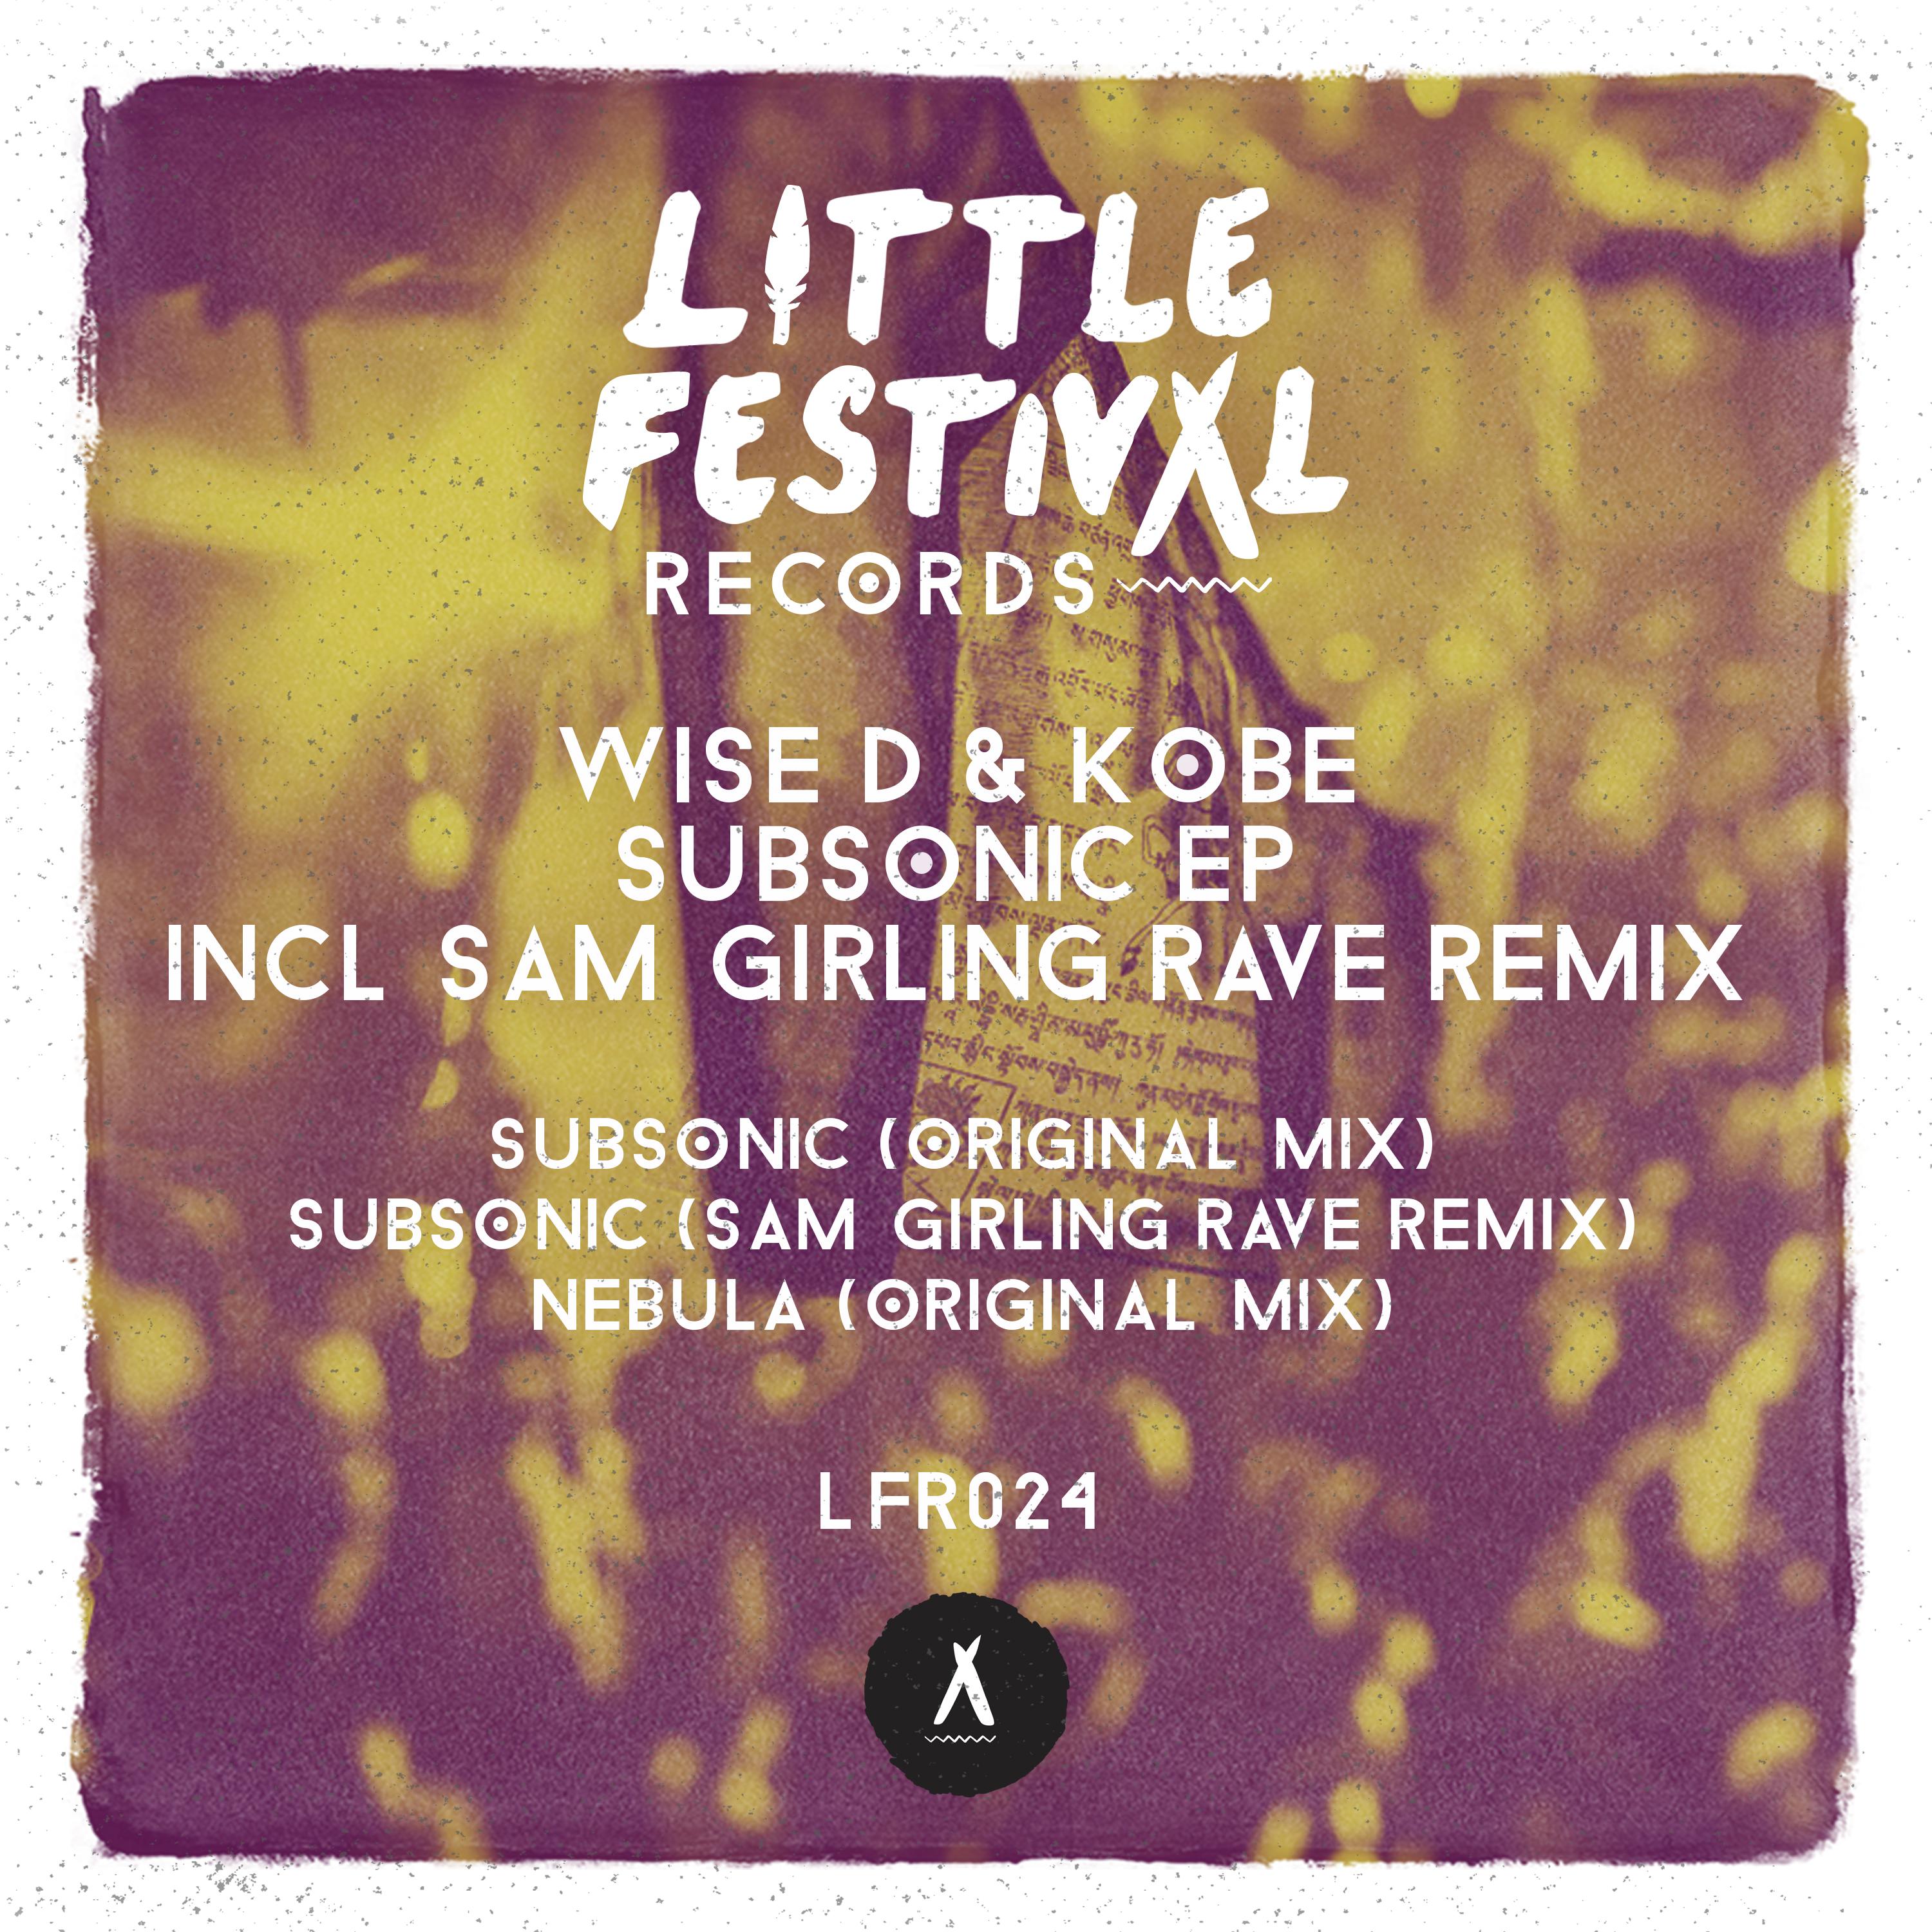 Wise D & Kobe - Subsonic (Sam Girling Rave Remix)